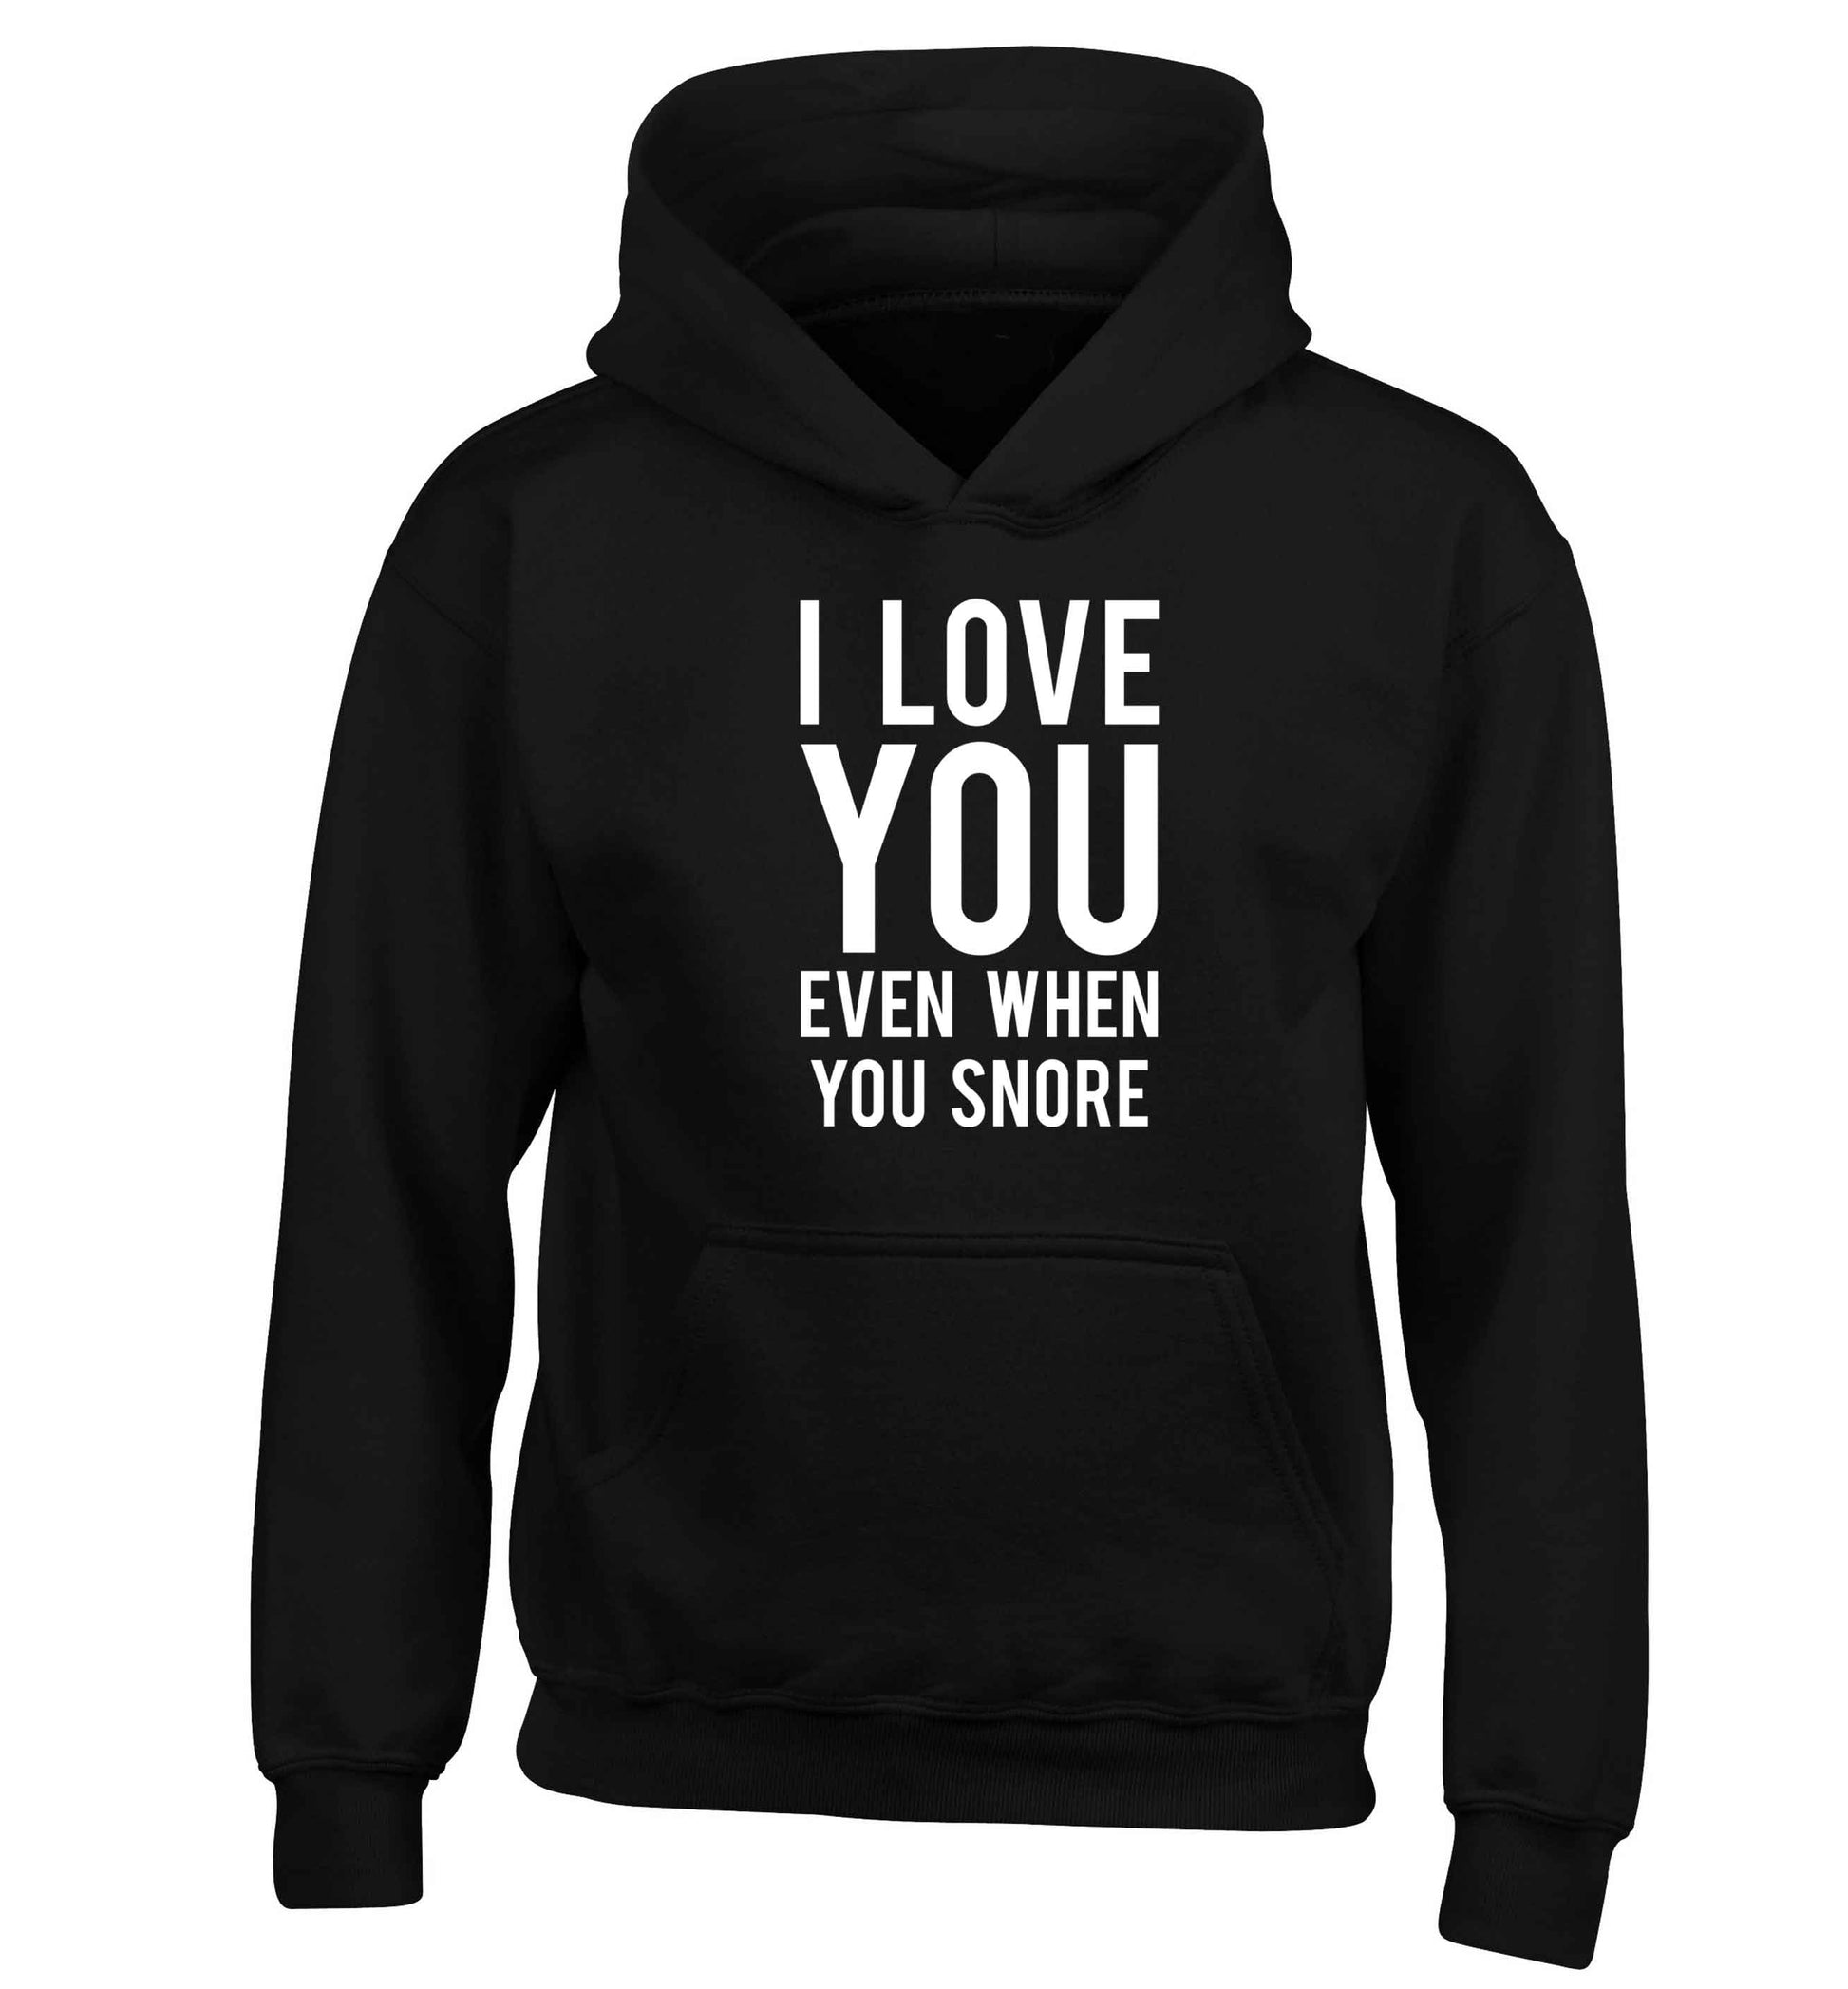 I love you even when you snore children's black hoodie 12-13 Years